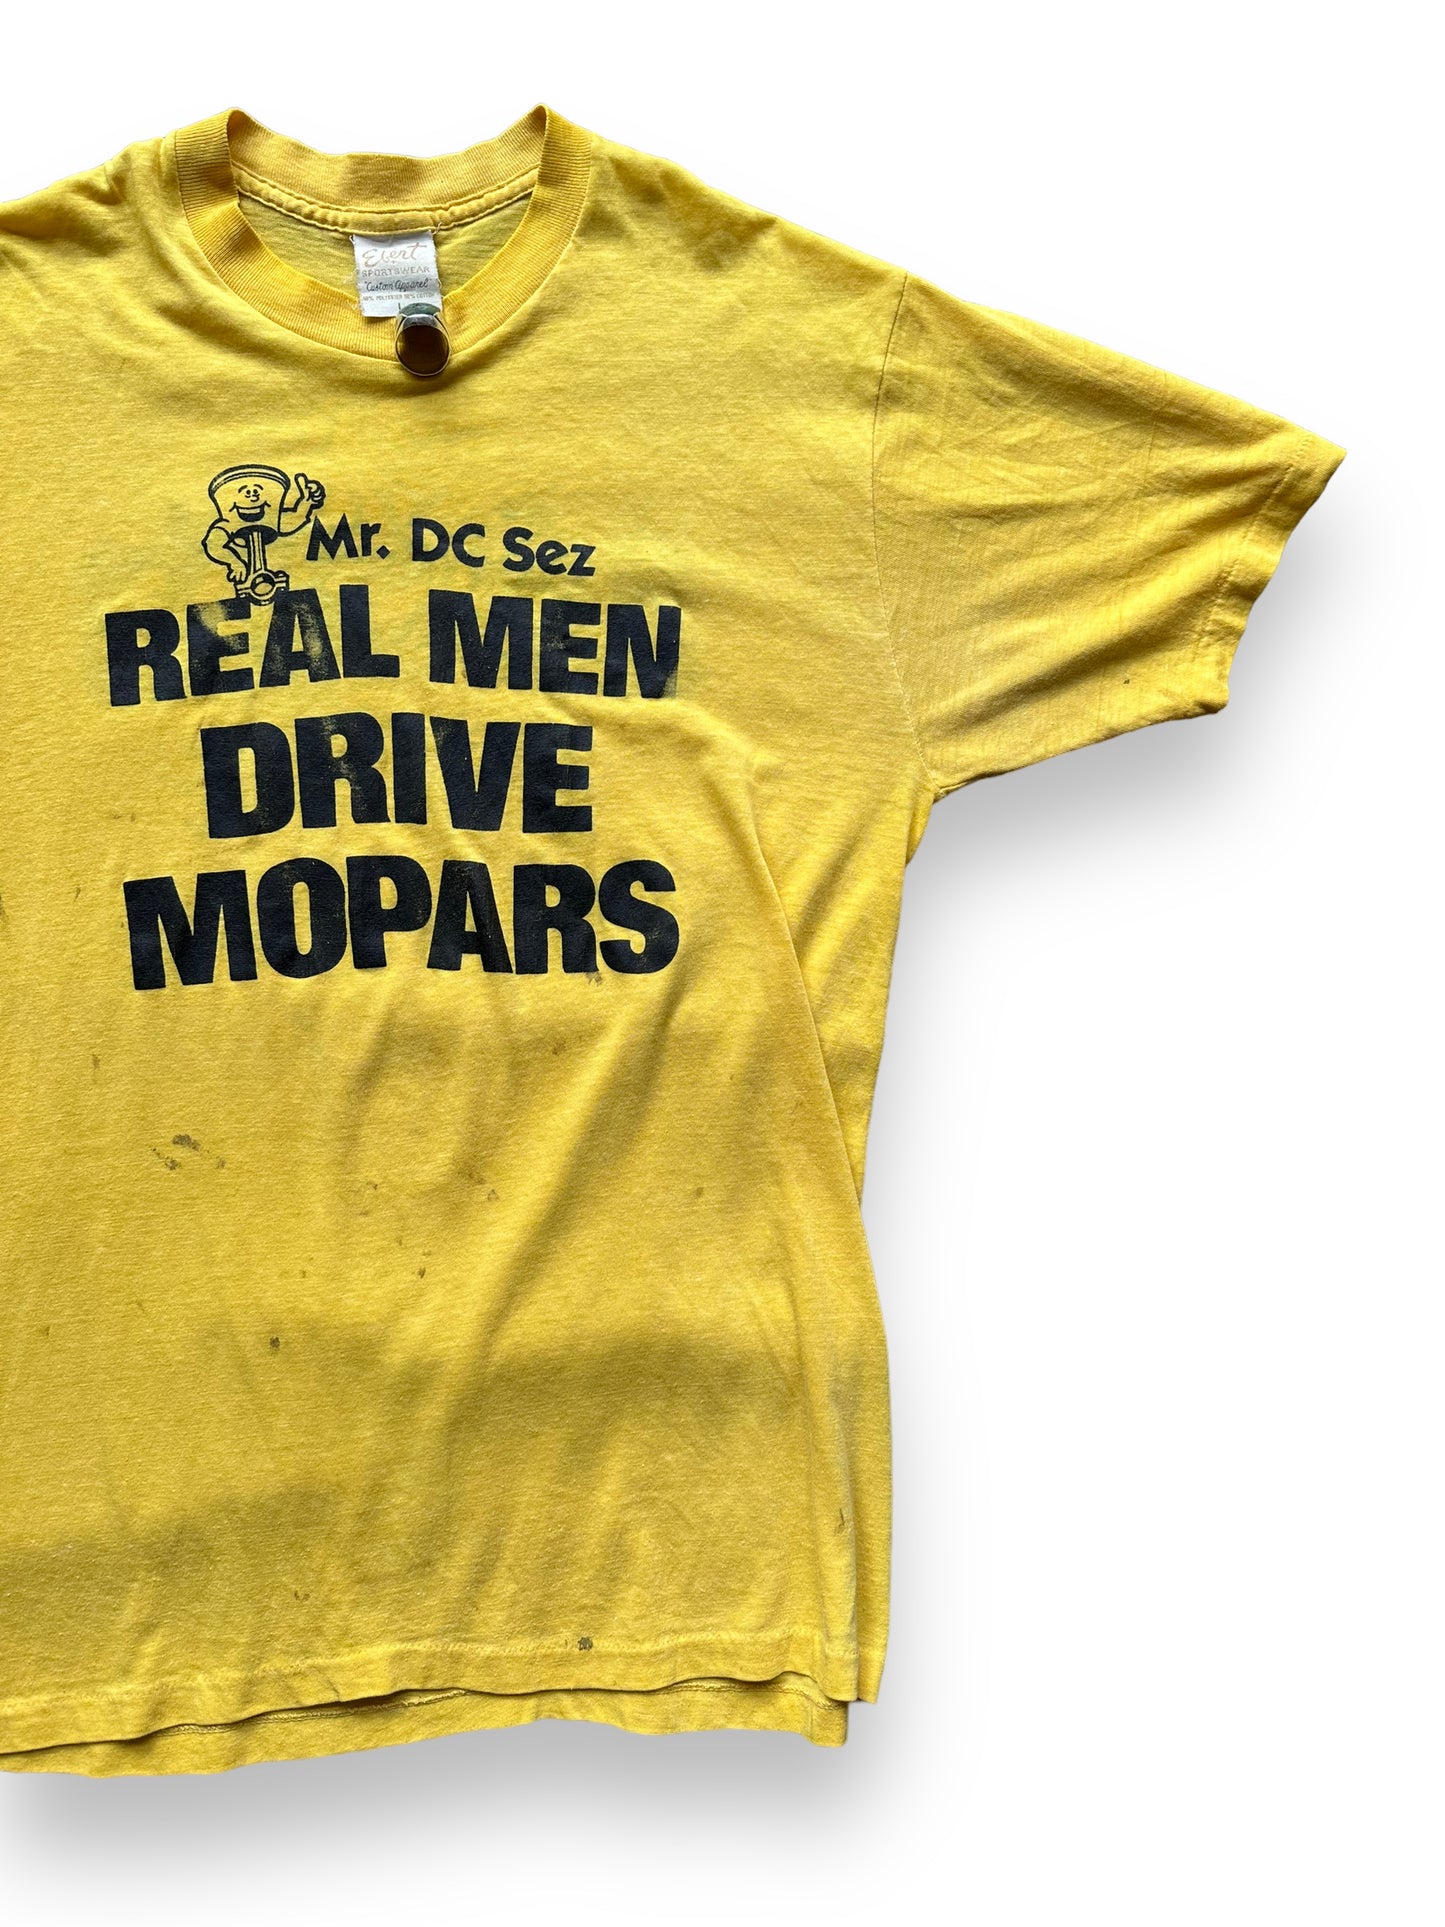 Front Left View of Vintage Real Men Drive Mopars Tee SZ L | Vintage Graphic T-Shirts Seattle | Barn Owl Vintage Tees Seattle